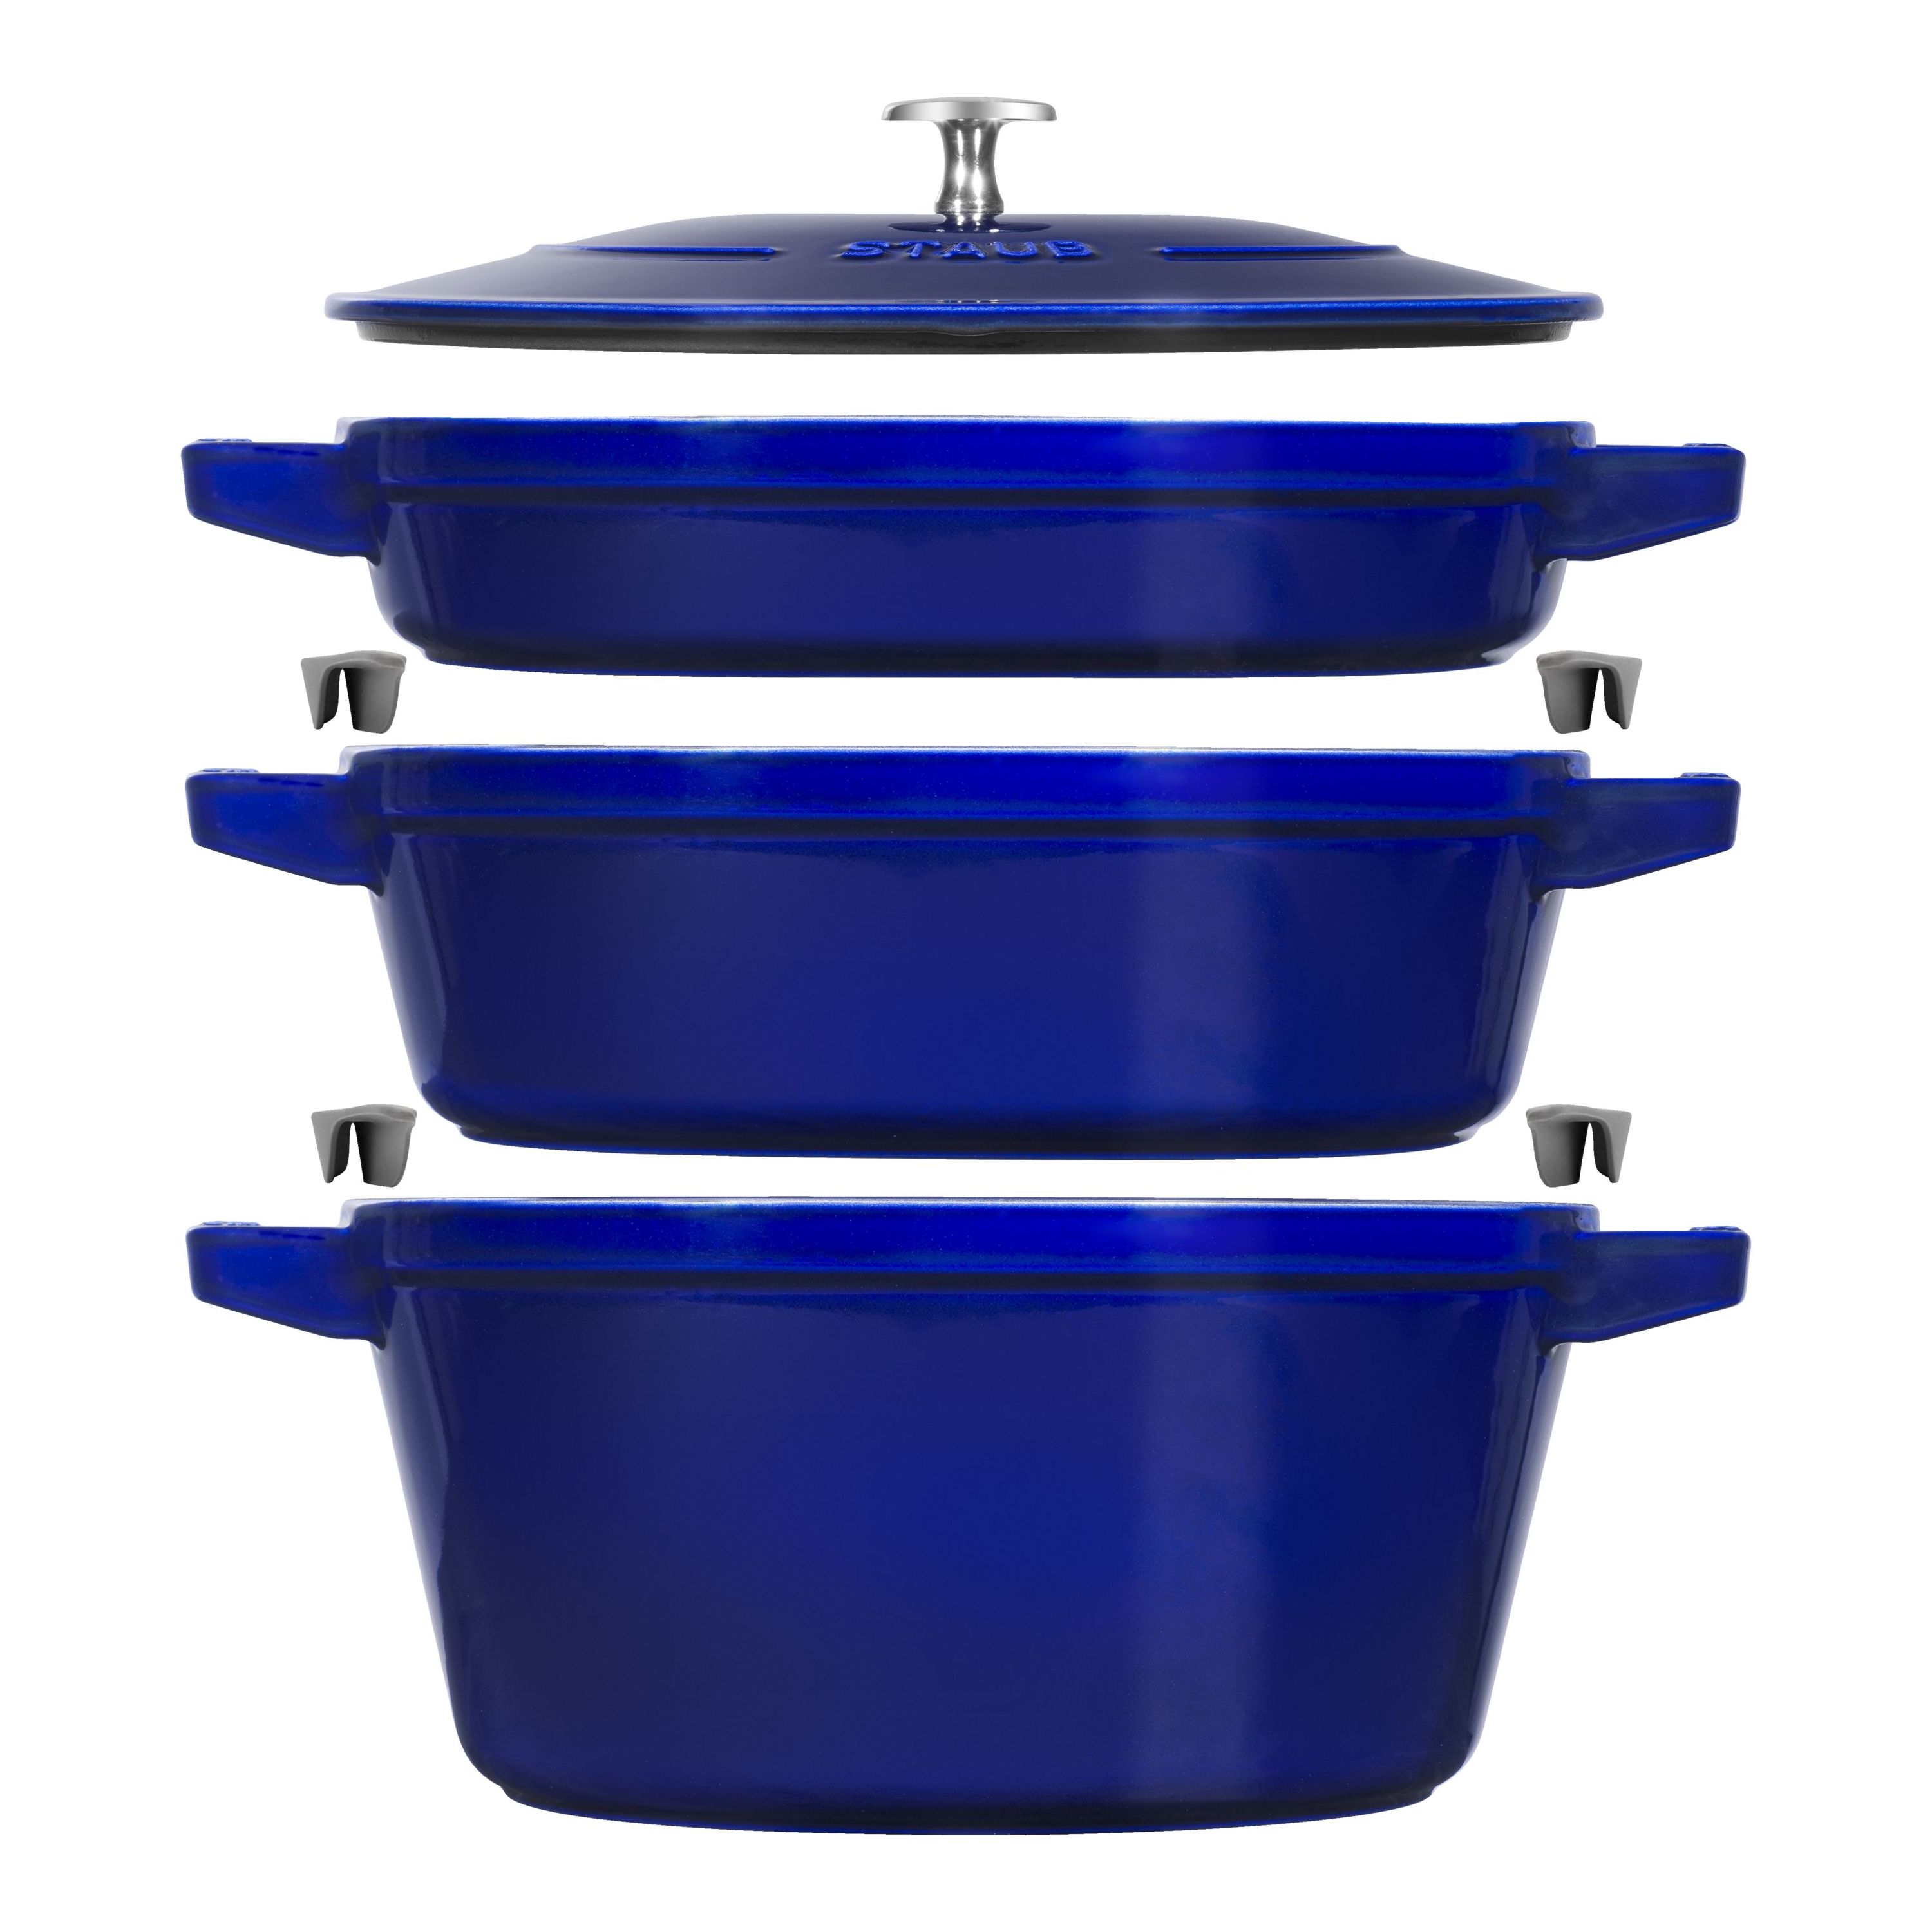 Staub's Stackable Cookware Is Now Exclusively at Williams-Sonoma